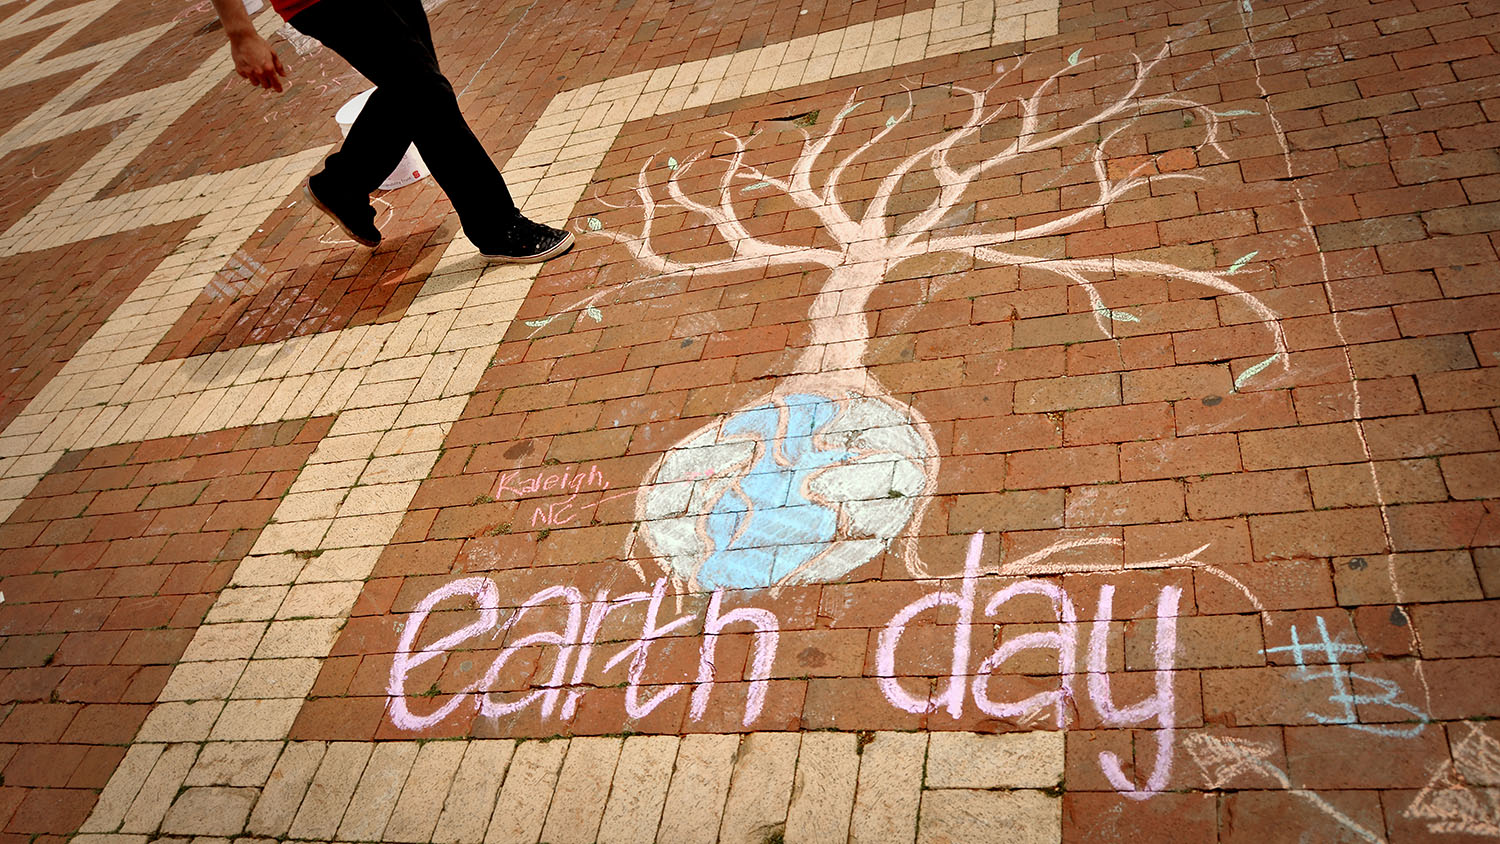 A chalk image of the Earth with a tree growing from it decorates NC State's Brickyard during Earth Day activities.